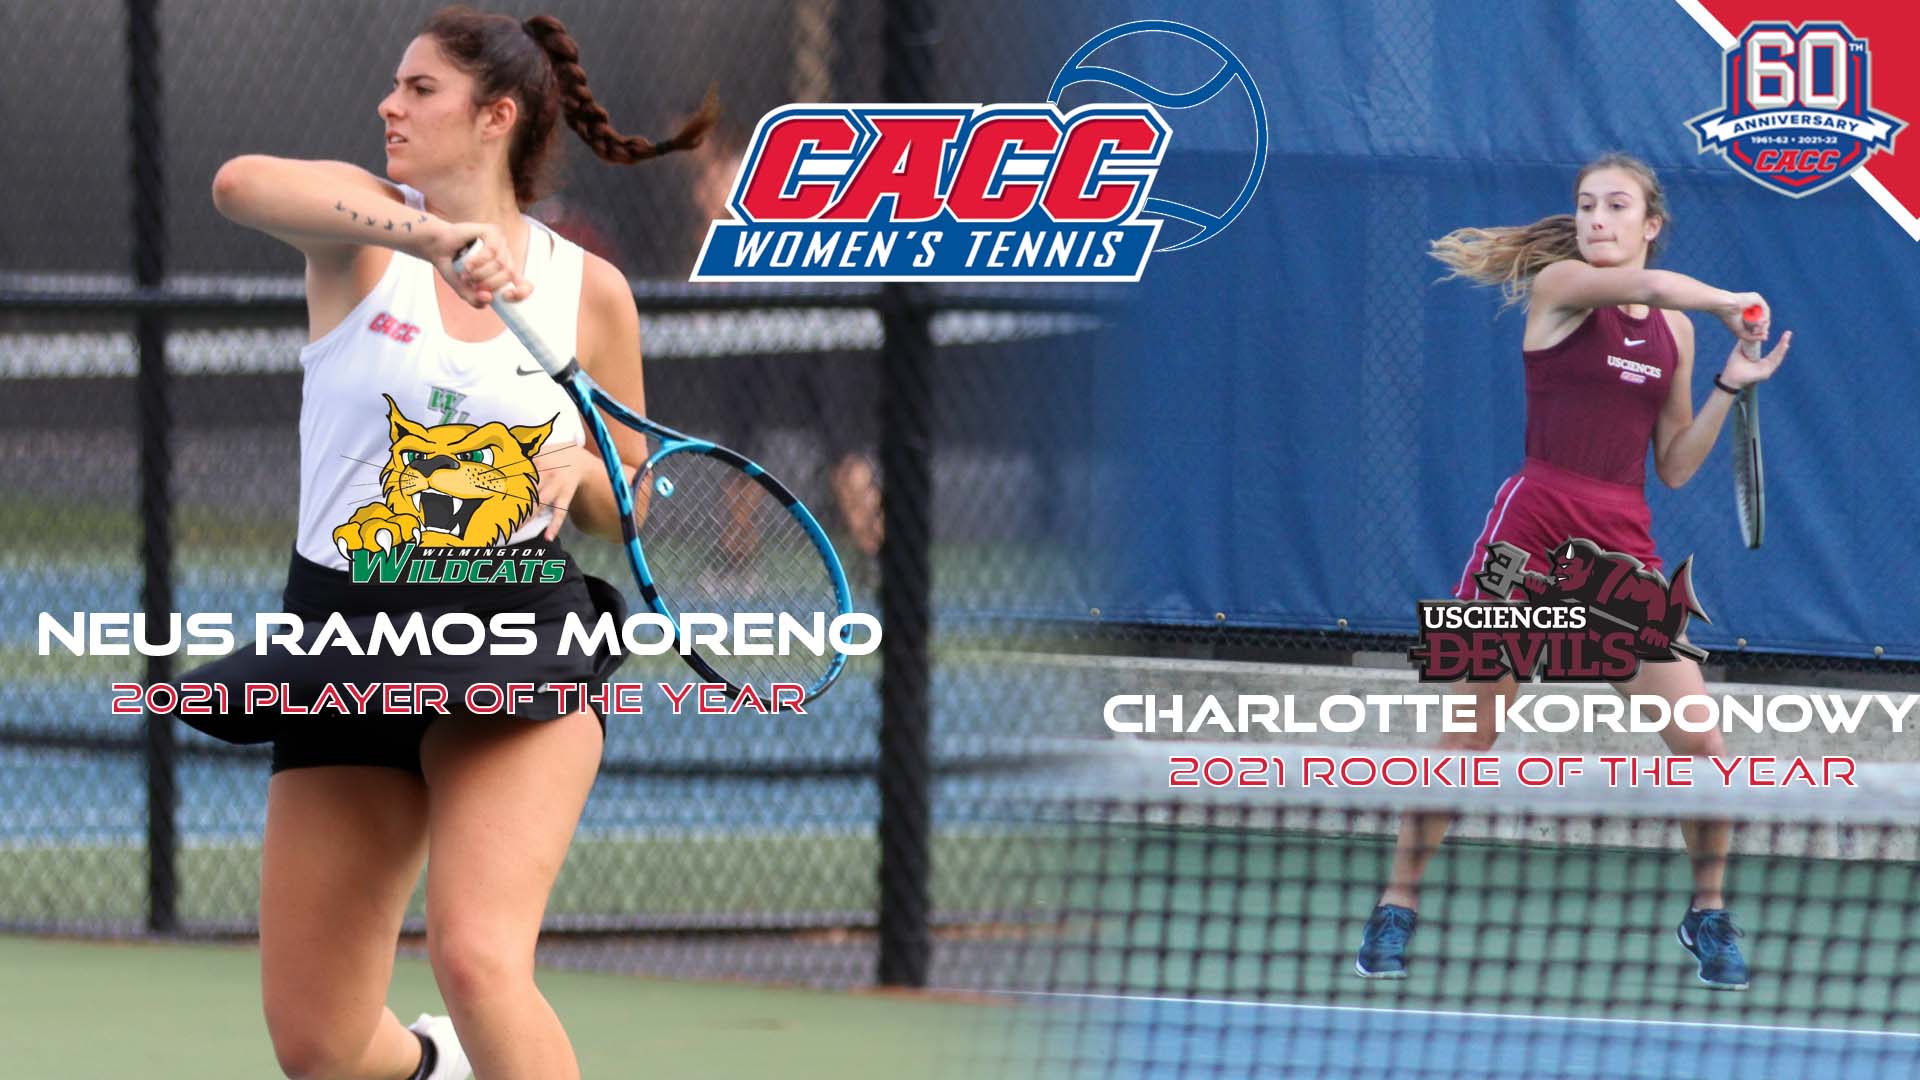 2021 CACC WTEN Year-End Awards